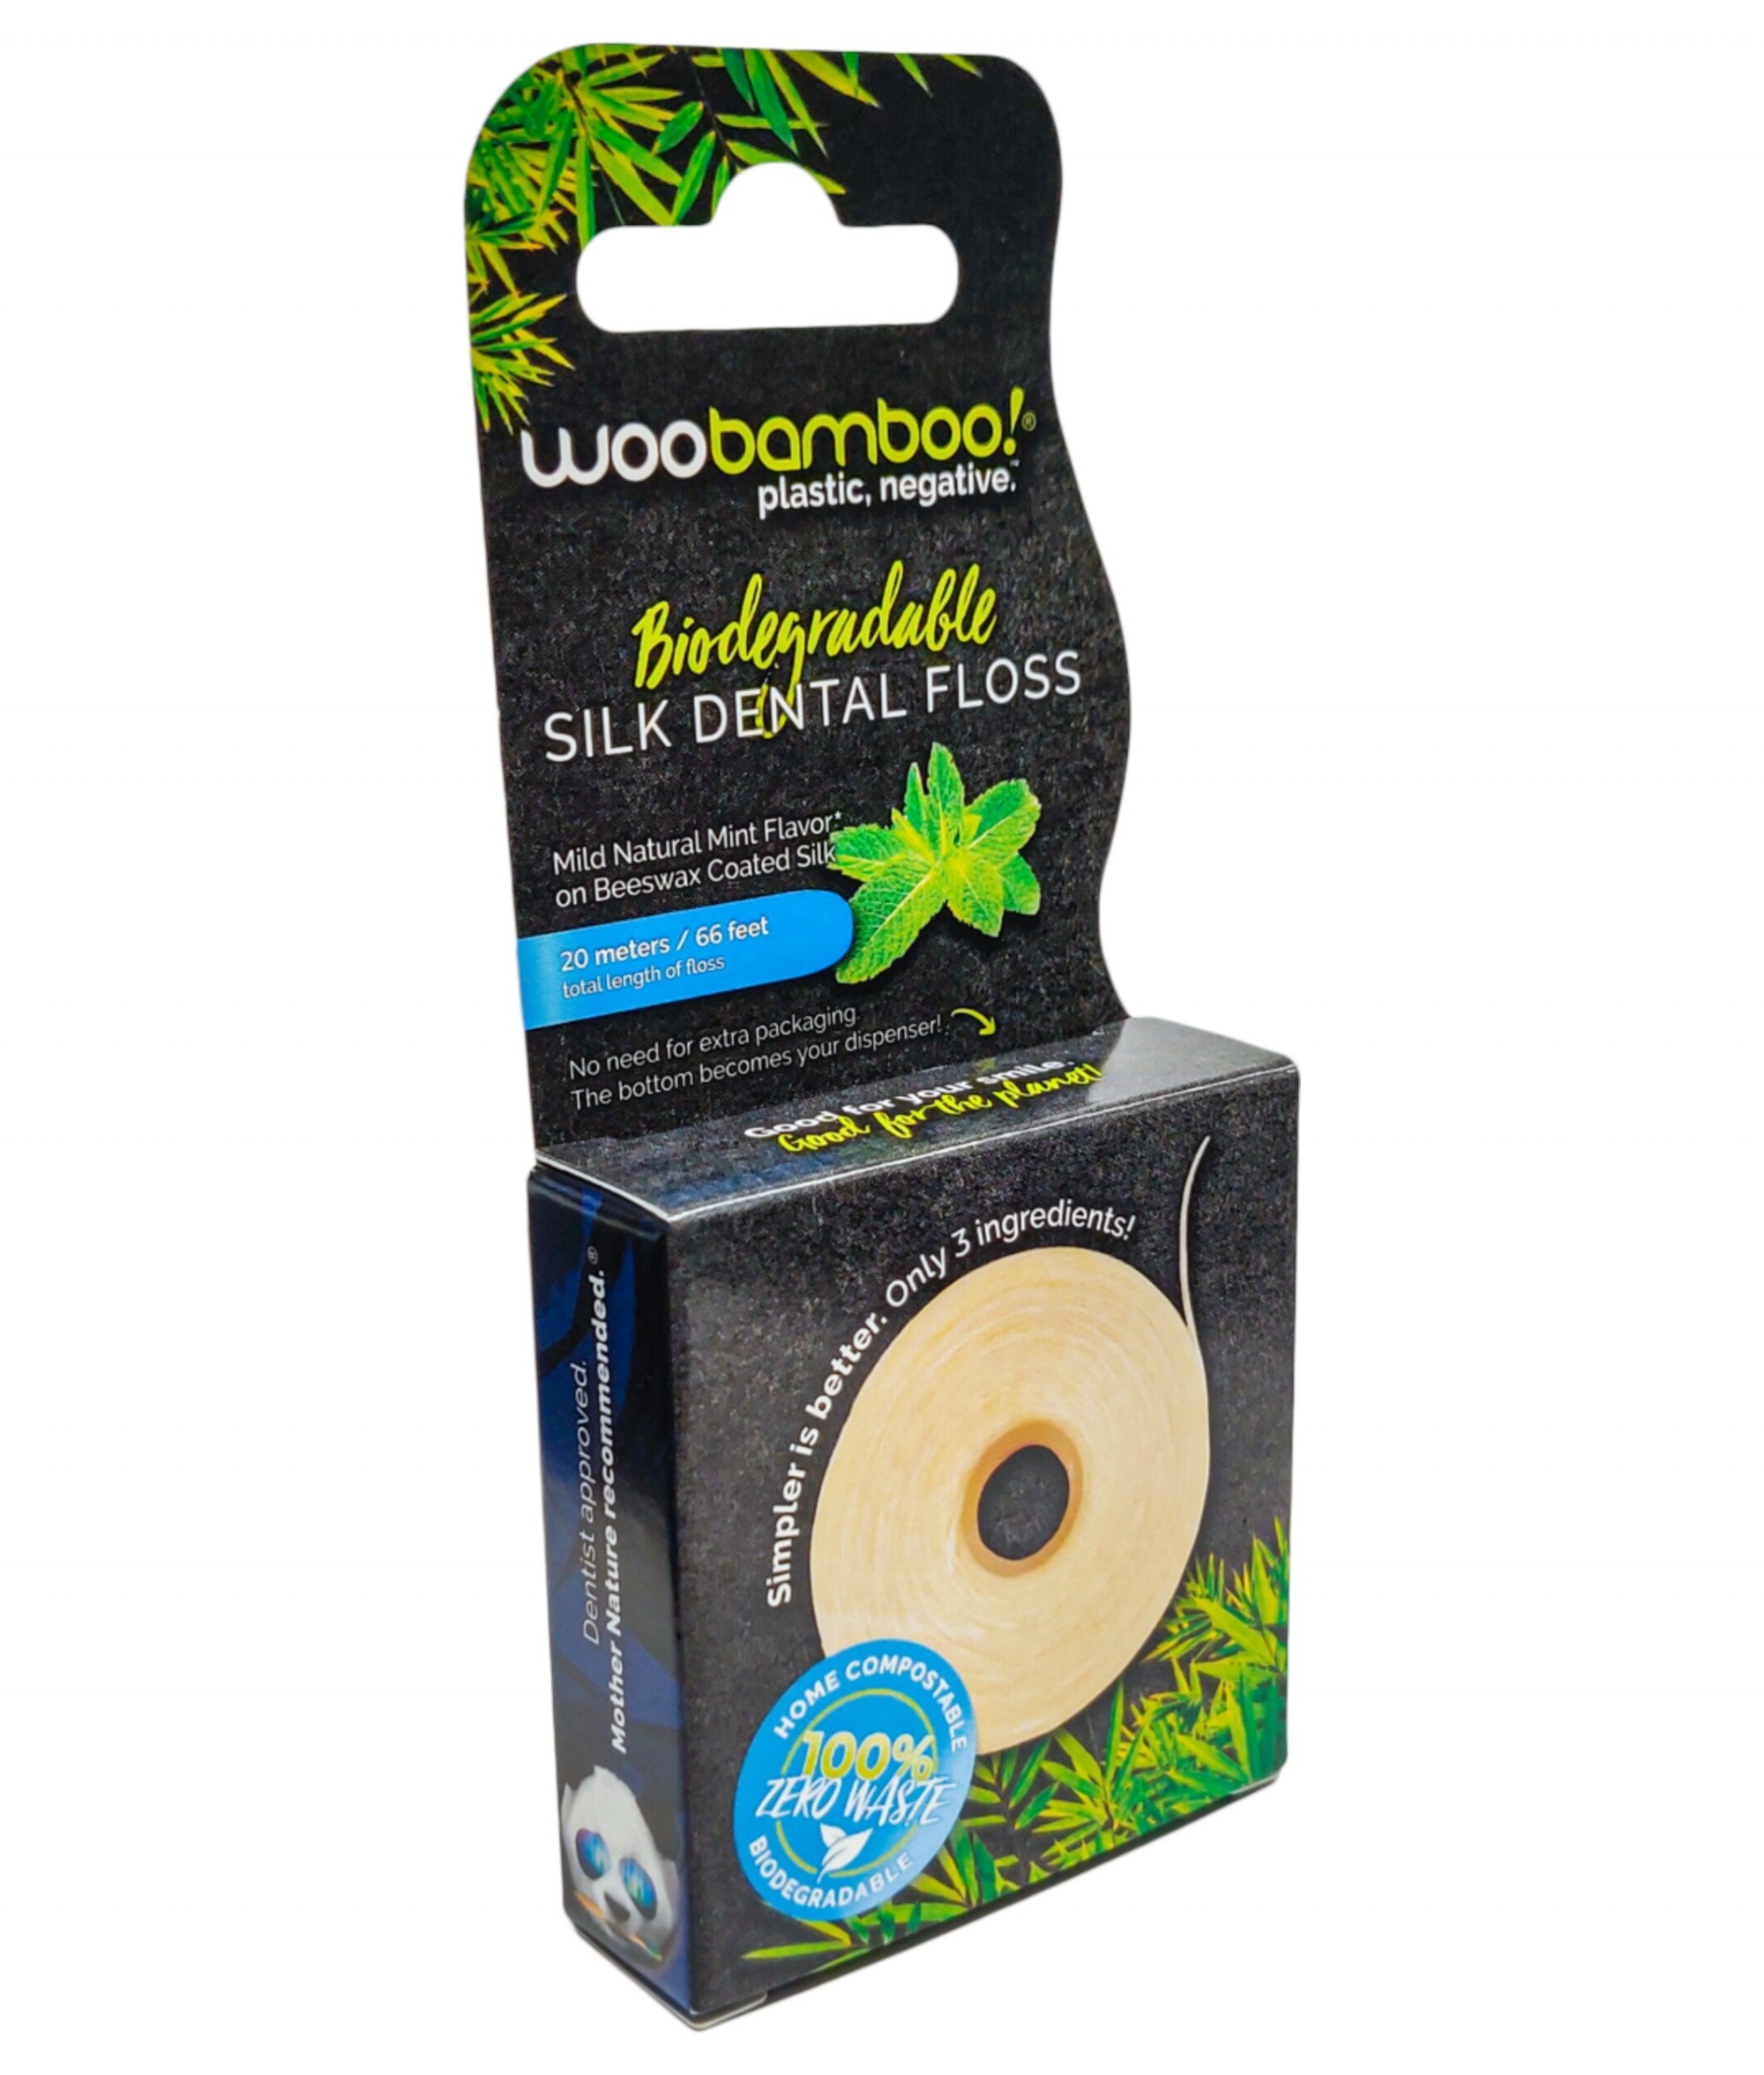 Woobamboo Silk Dental | Cancer Research Online